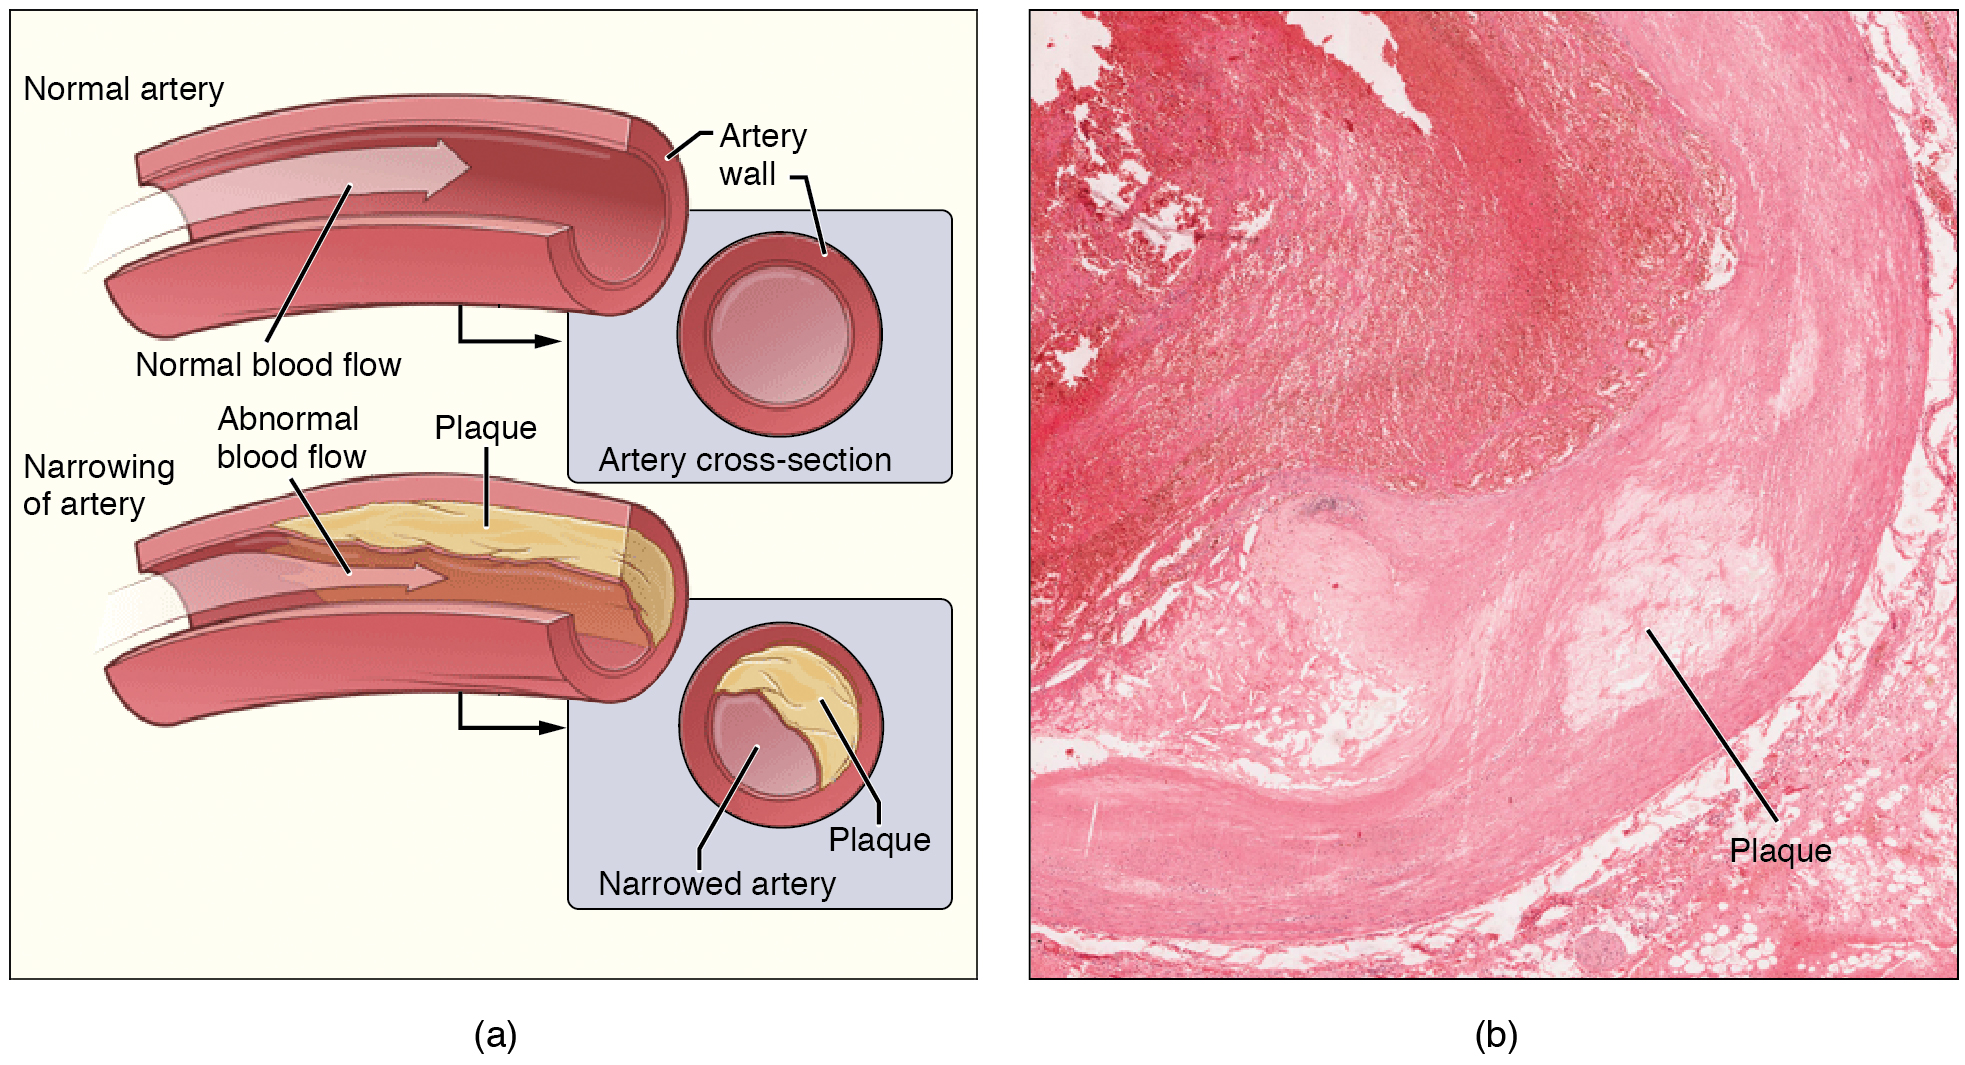 Illustration and micrograph, showing atherosclerosis